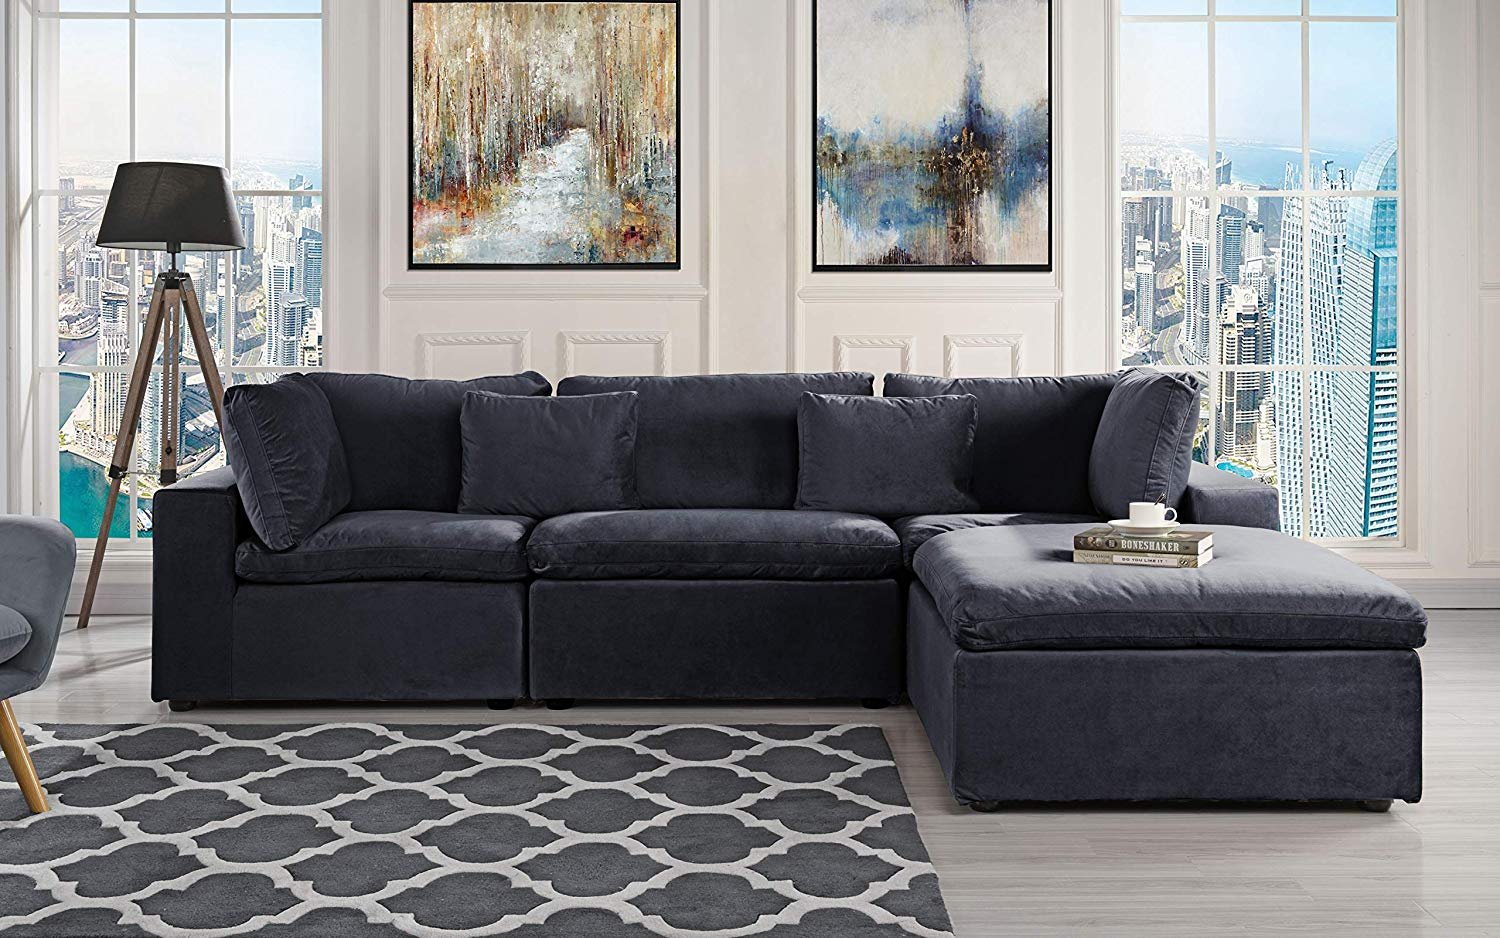 Classic Large Velvet Sectional Sofa, Low Profile Shape Couch Wide Chaise, Black 662187615073 eBay